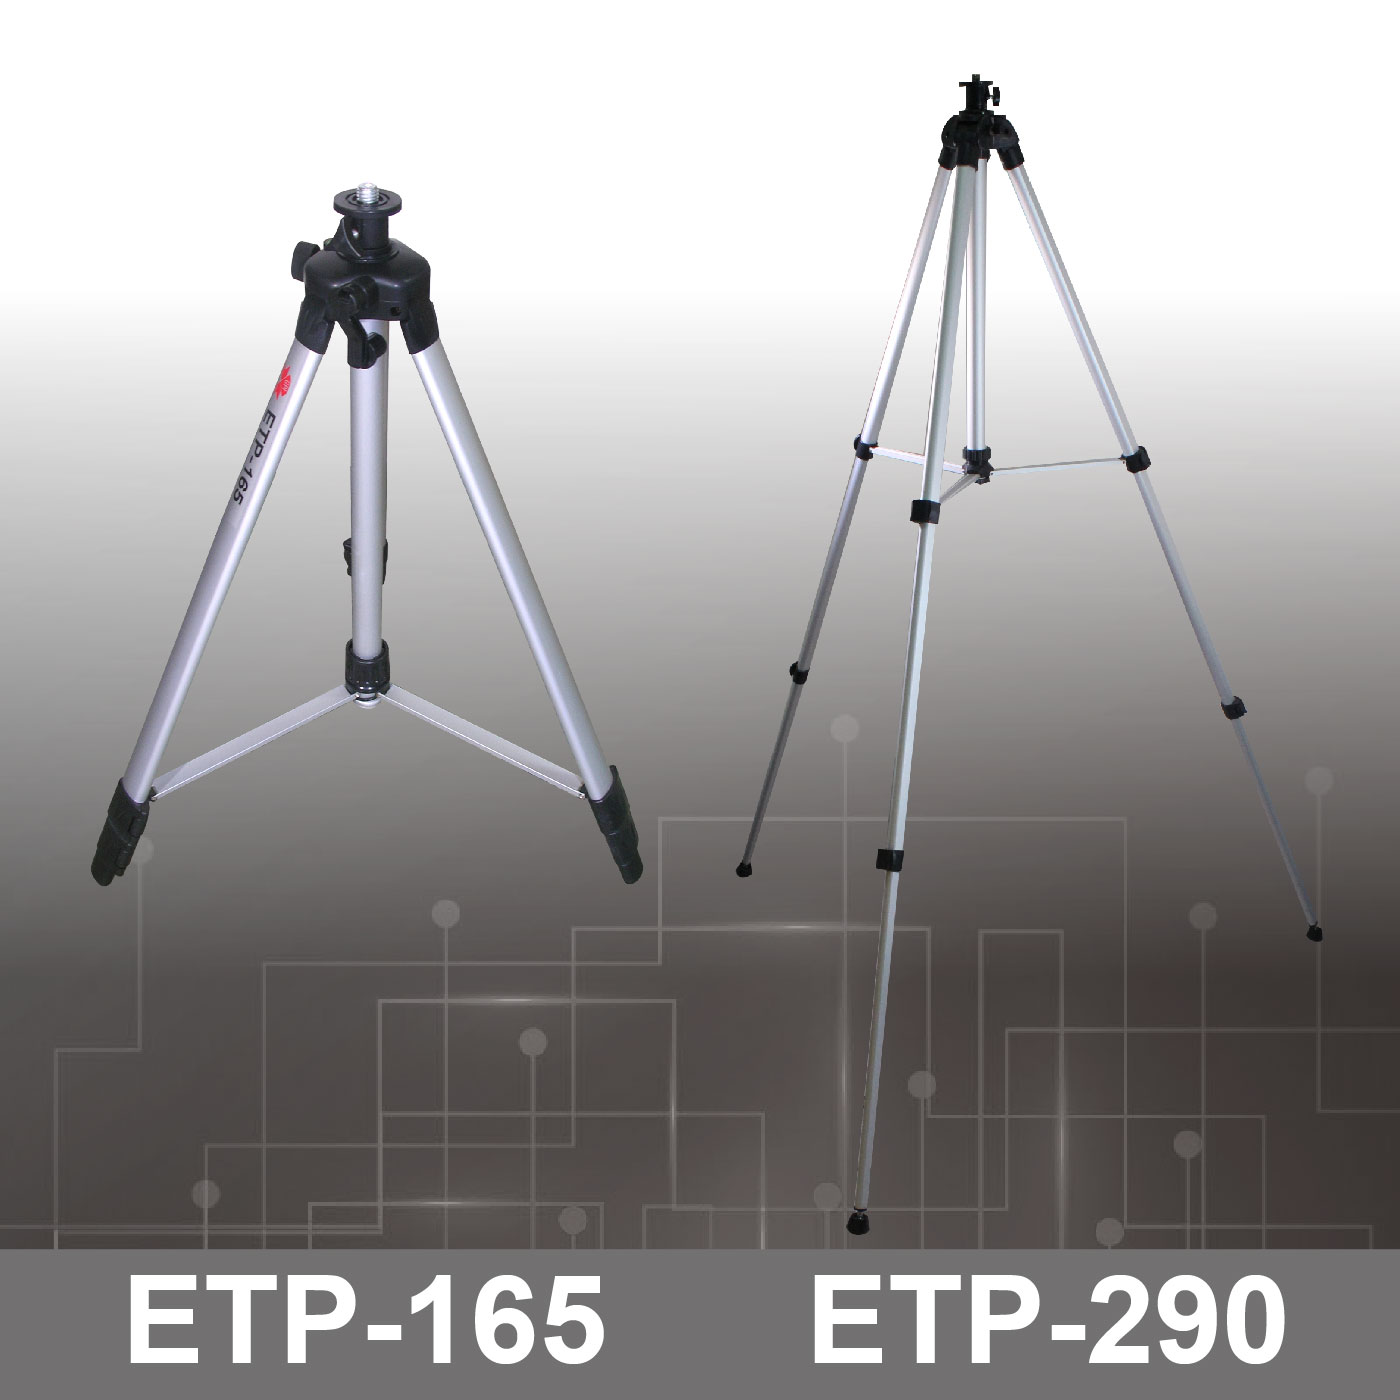 Detector/Tripod/Wall bracket/Charger